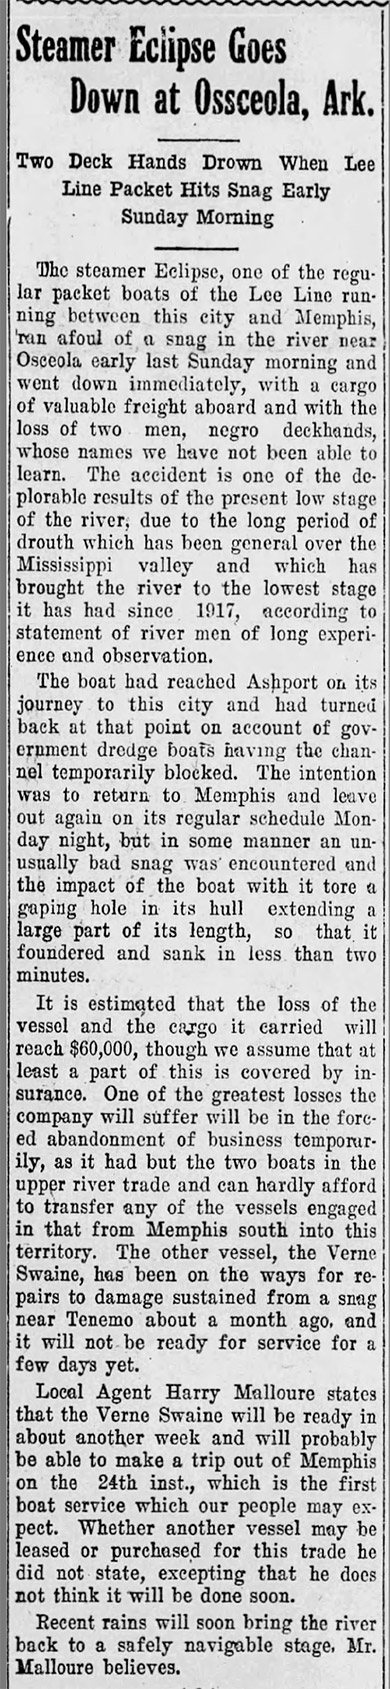 "Steamer Eclipse Goes Down" newspaper clipping